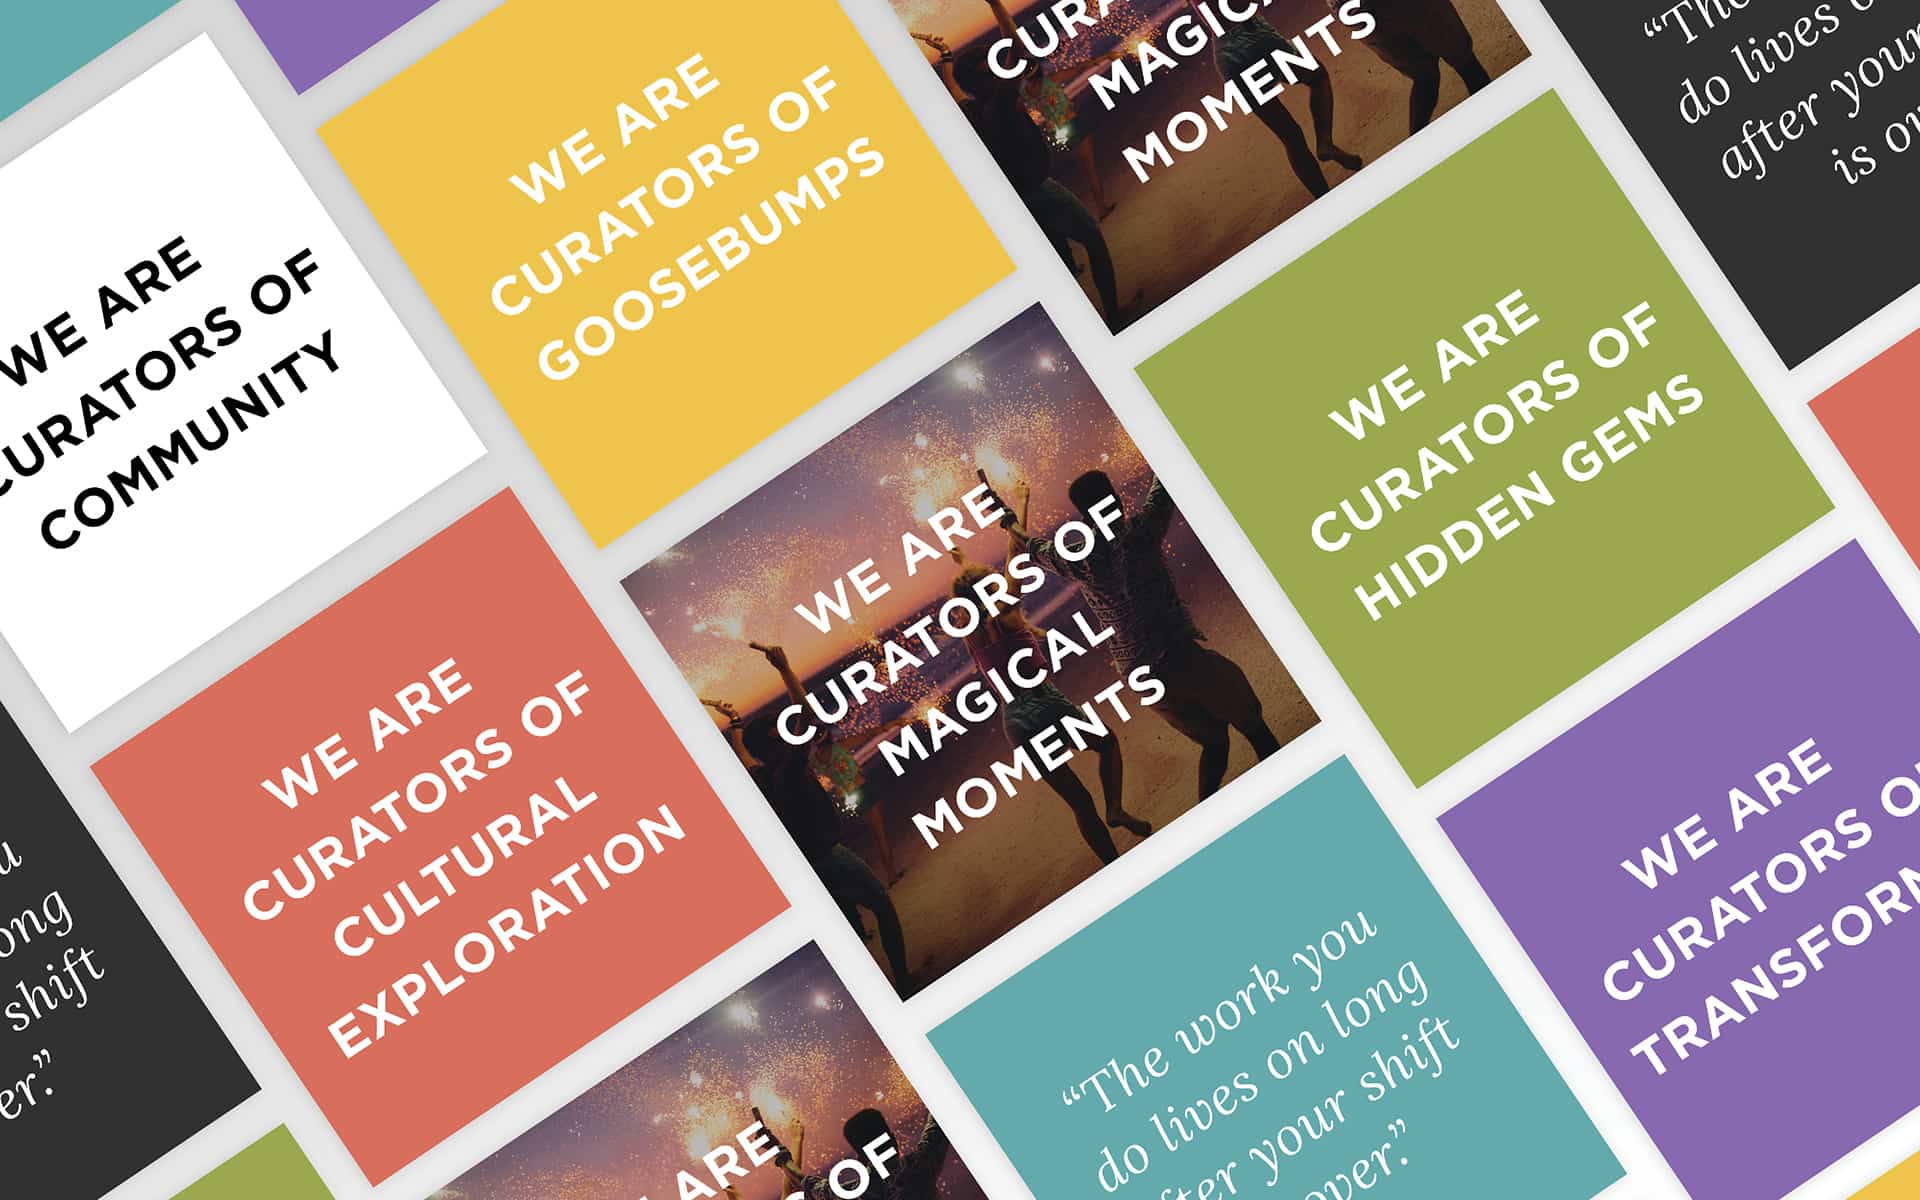 copy samples from employer branding value story